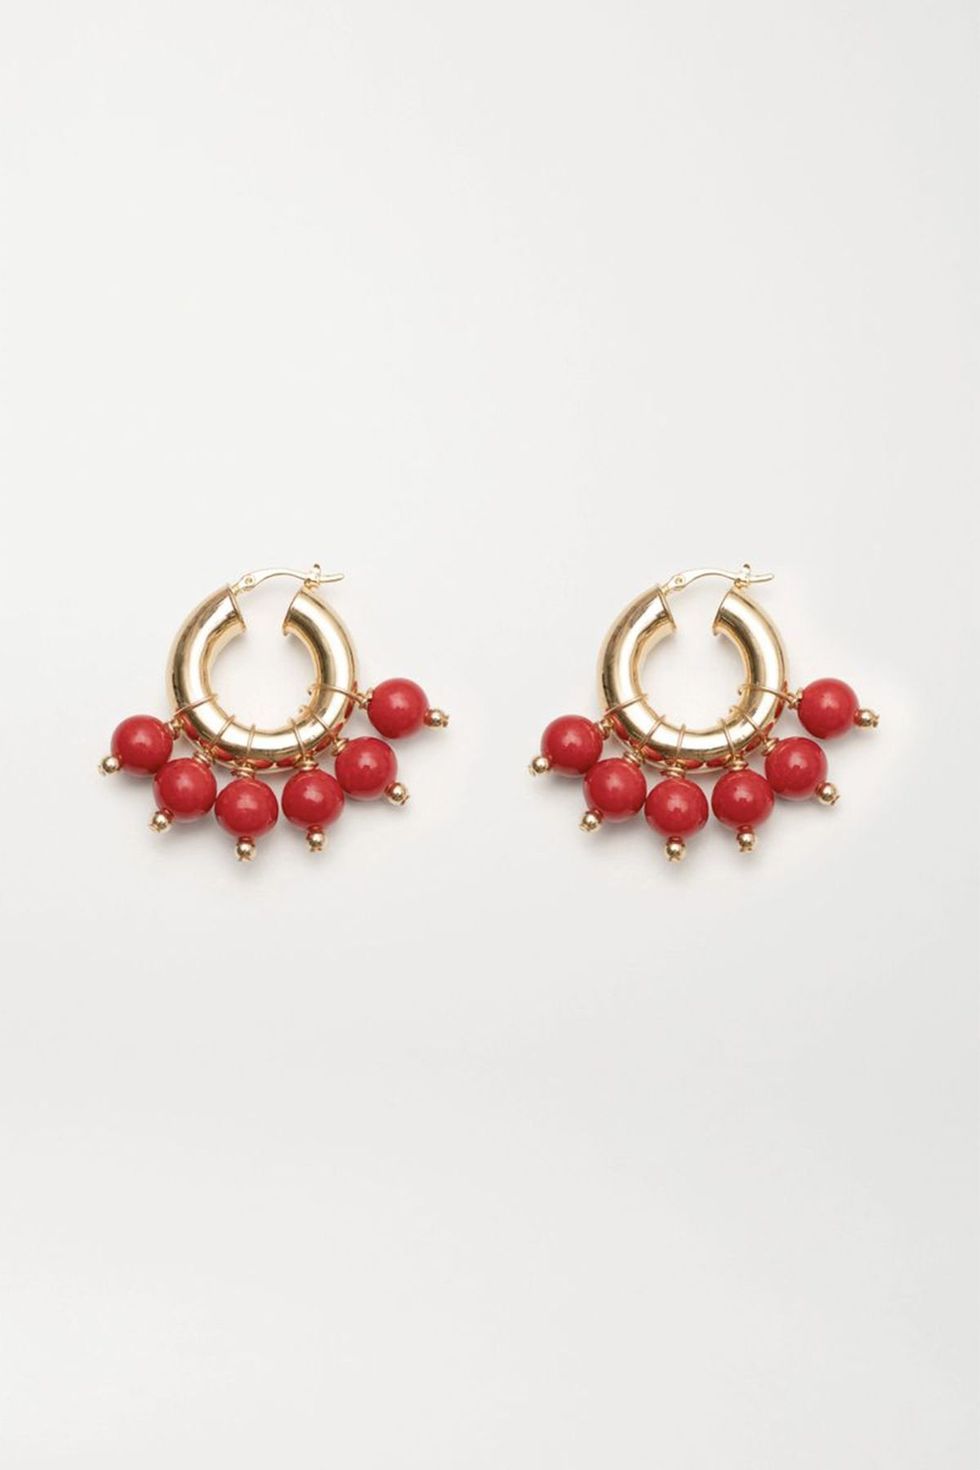 The Red Kavala Gold-Plated Coral Earrings